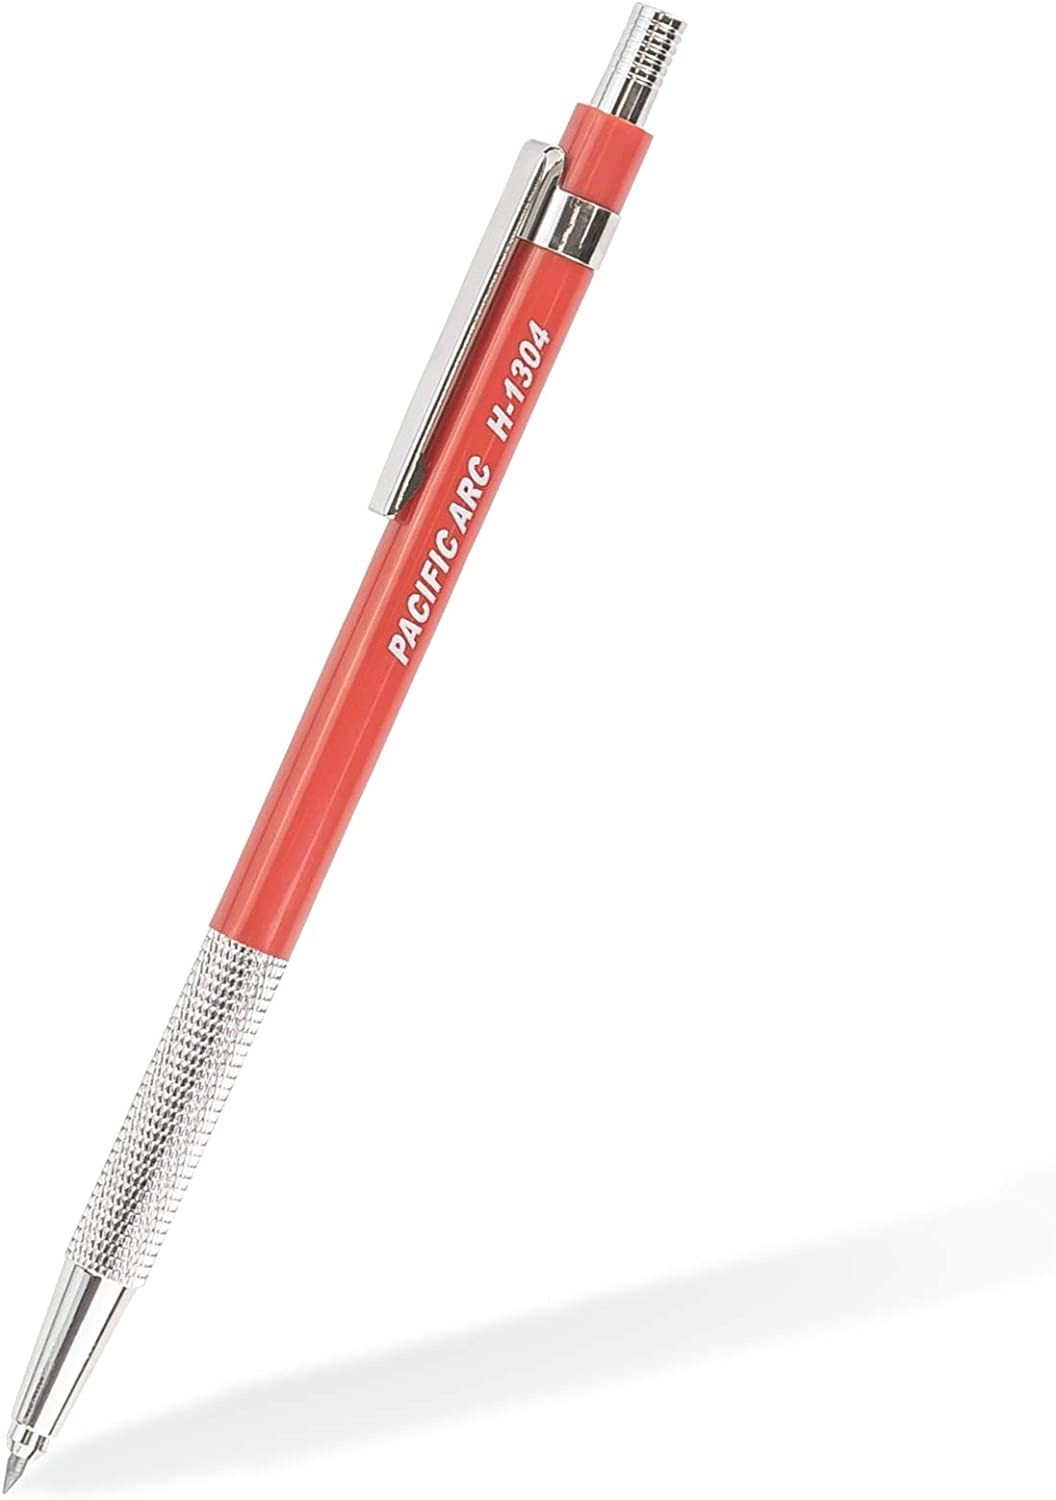 Pacific Arc 2Mm Gravity Fed Lead Holder and Lead Sharpener, Red Drafting Pencil 